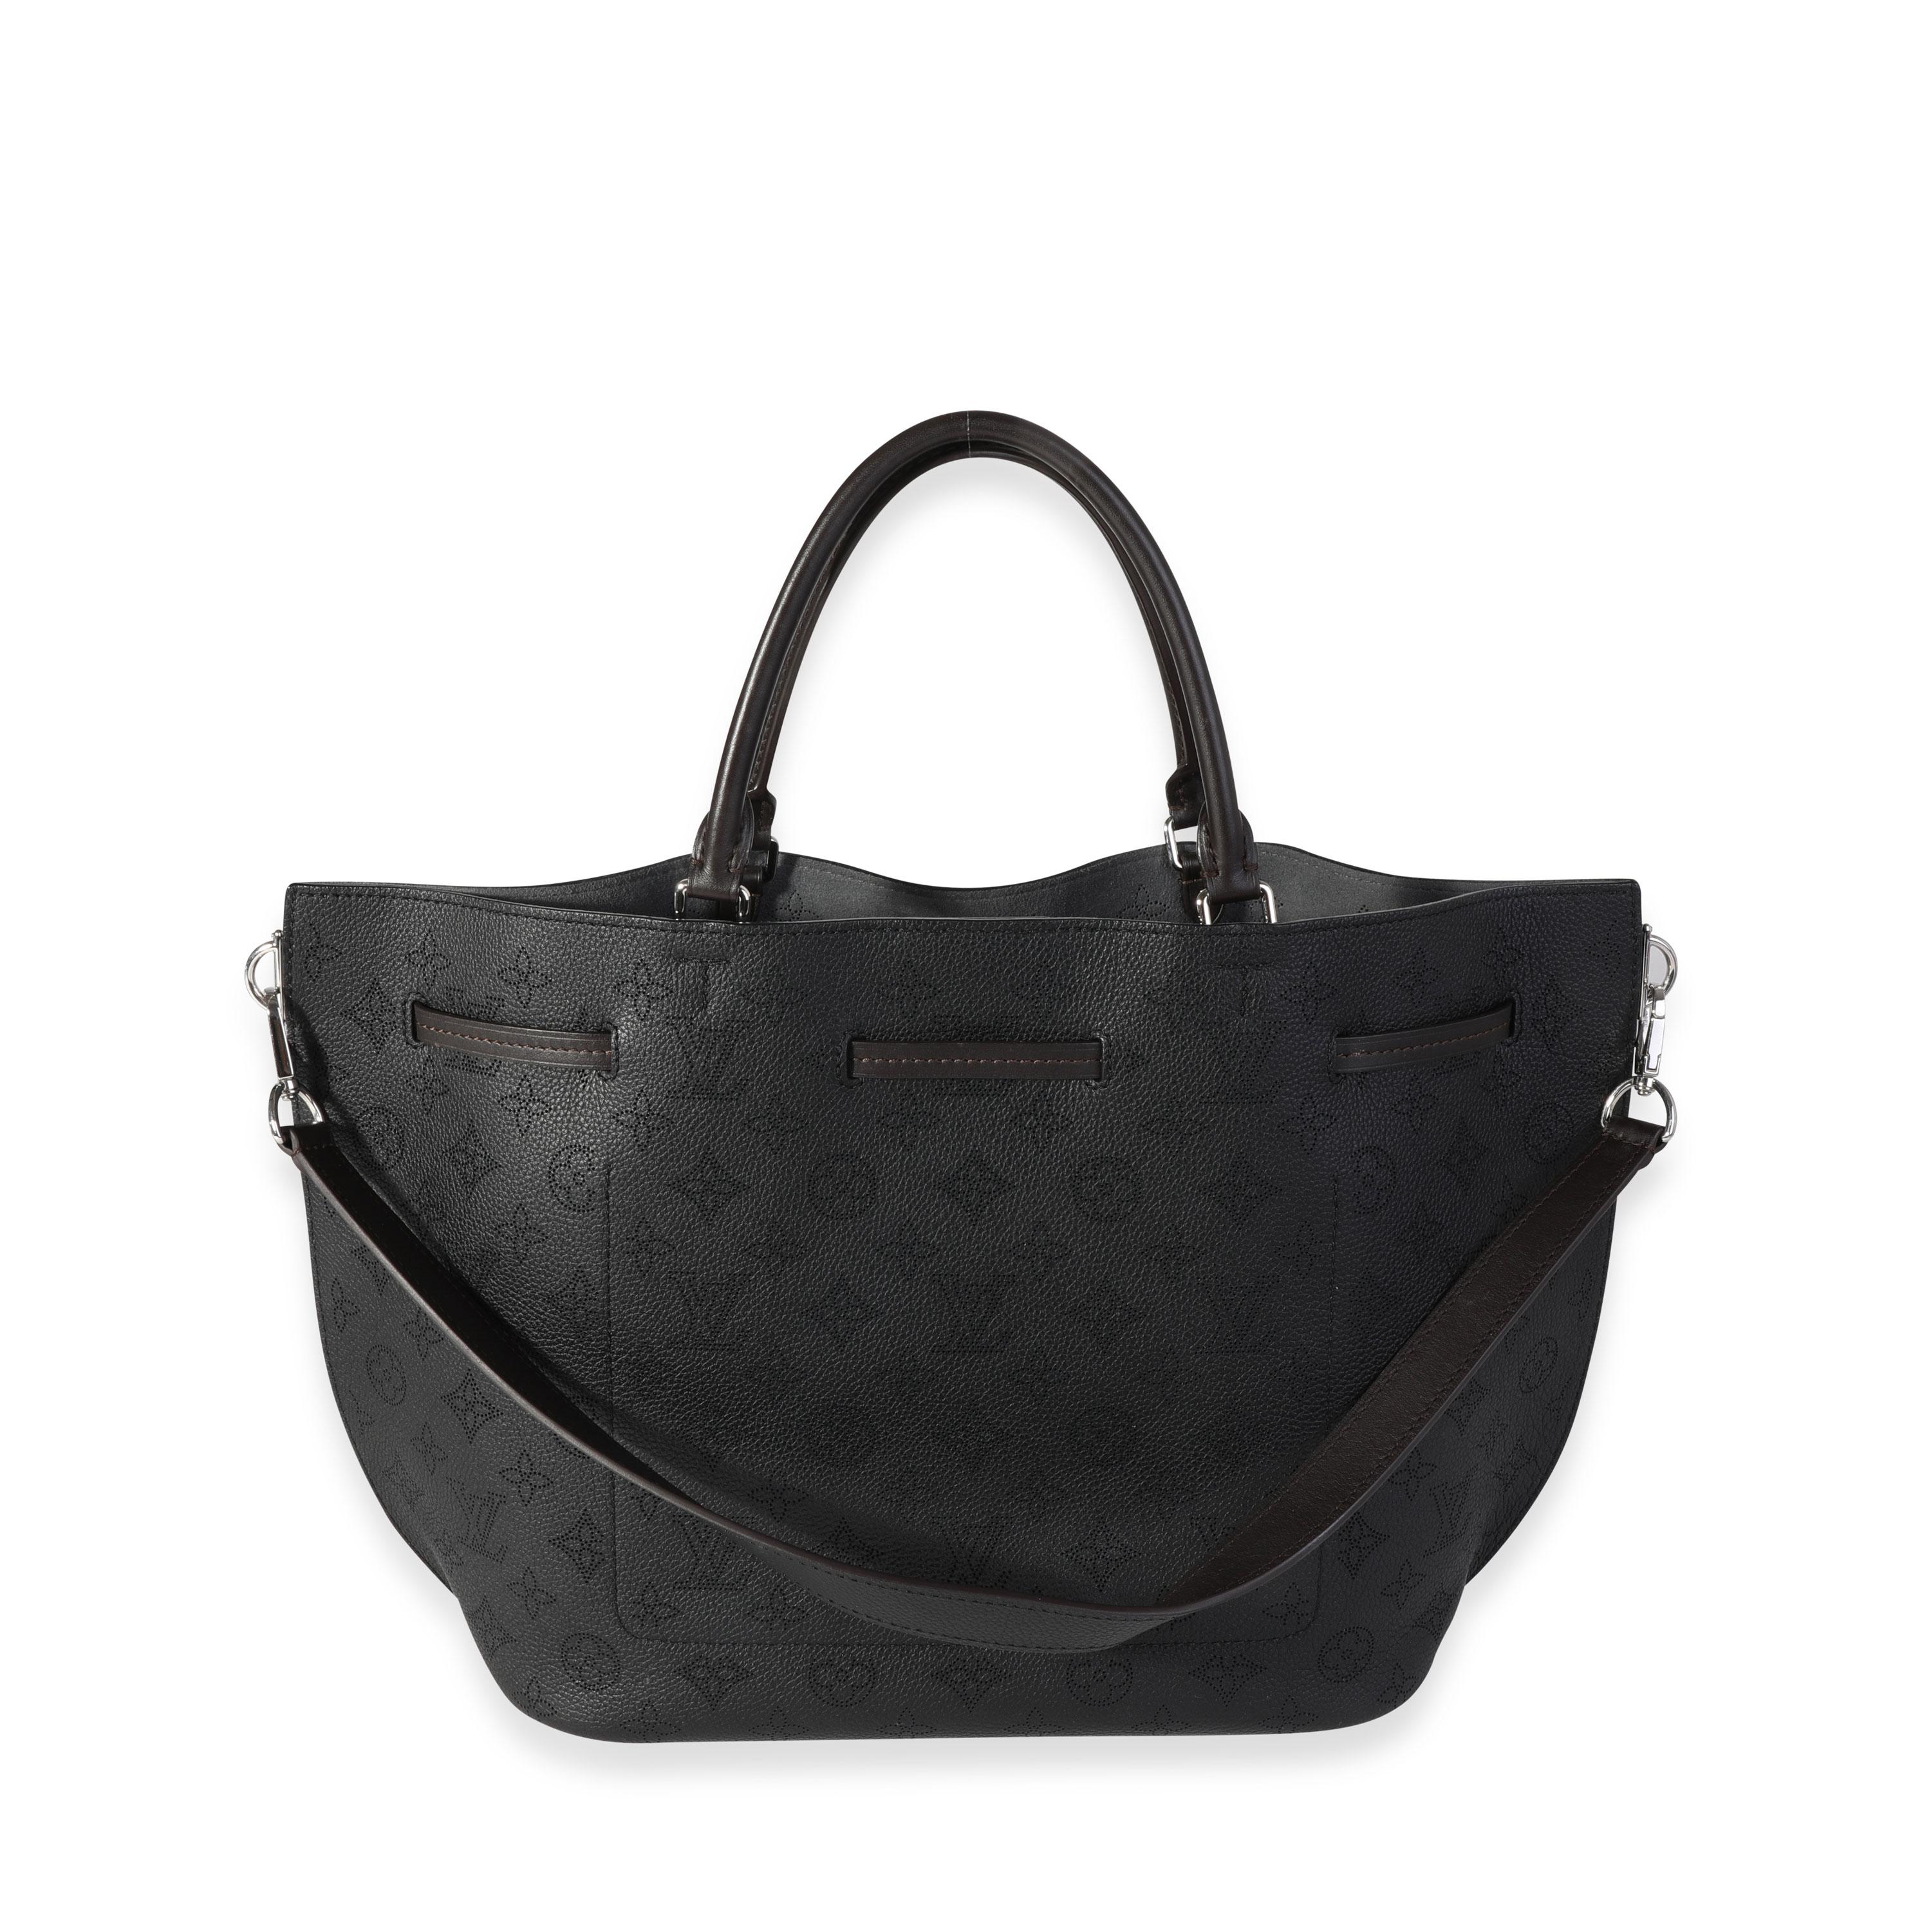 Listing Title: Louis Vuitton Black Mahina Leather Girolata Bag
SKU: 118458
MSRP: 3950.00
Condition: Pre-owned (3000)
Handbag Condition: Very Good
Condition Comments: Very Good Condition. Plastic on some hardware. Scratching and tarnishing to